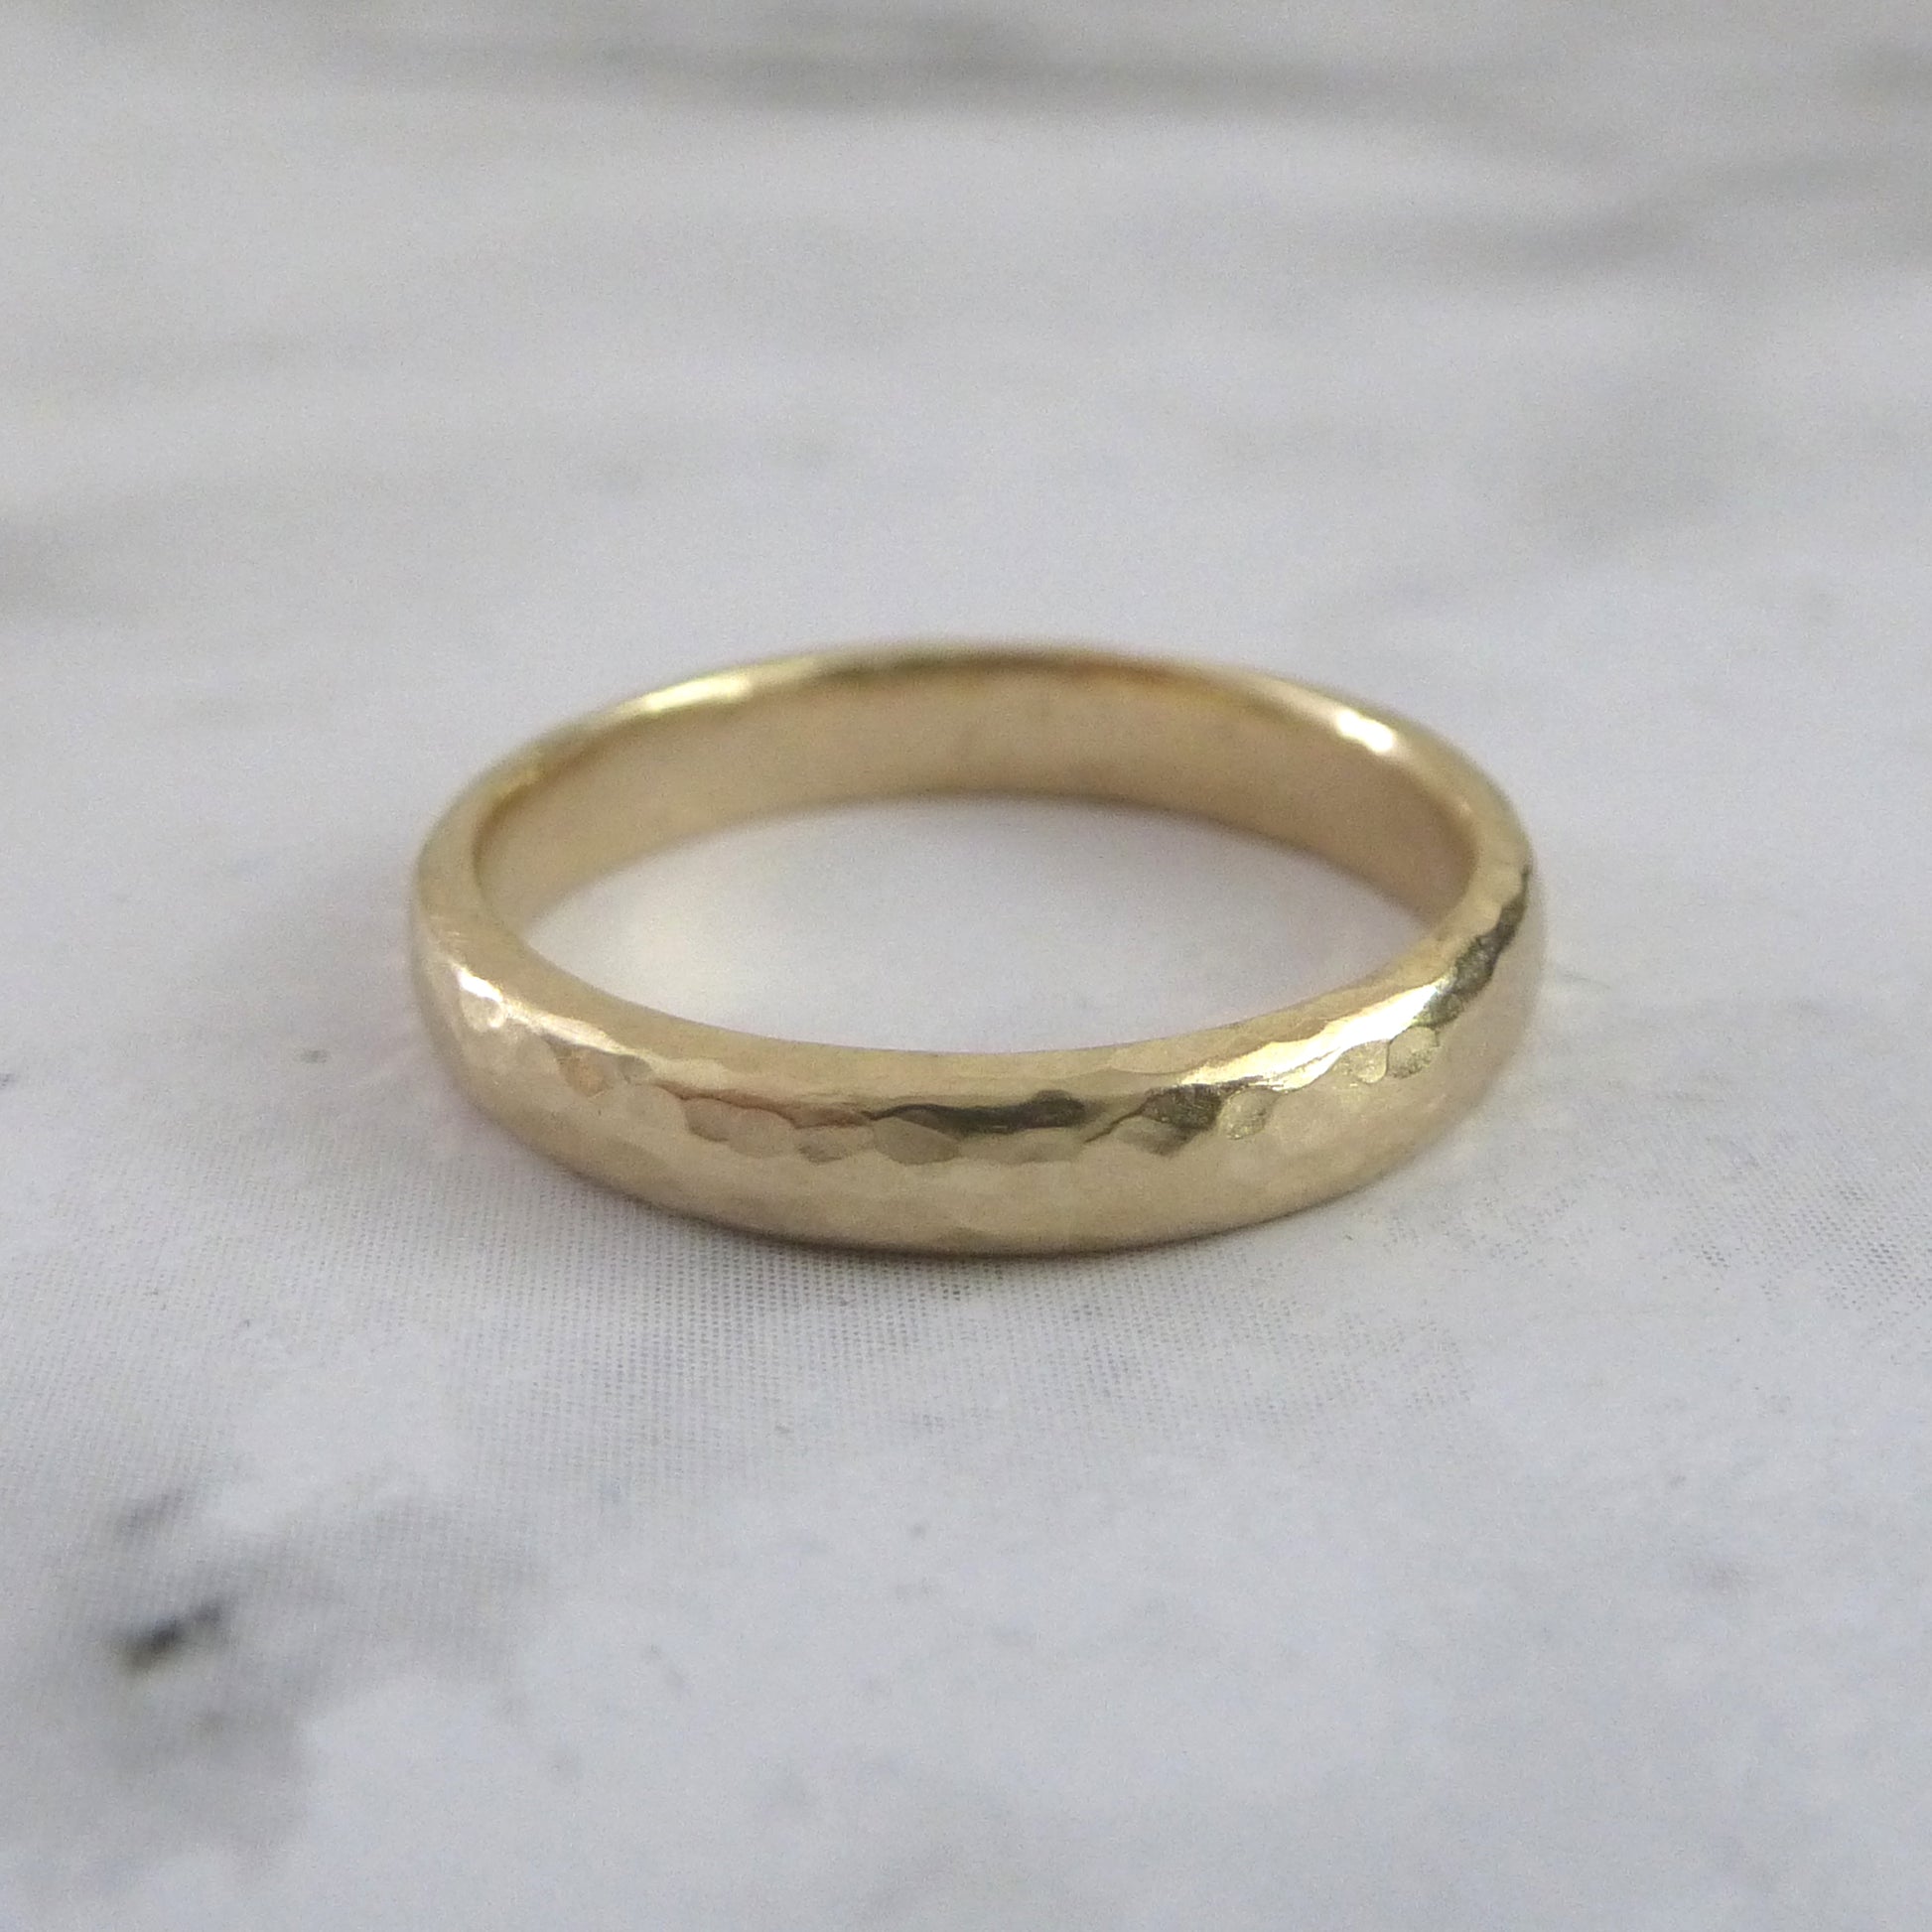 Slim Band Ring in 9ct Gold - 9ct yellow - 3mm - Hammered or Smooth ...